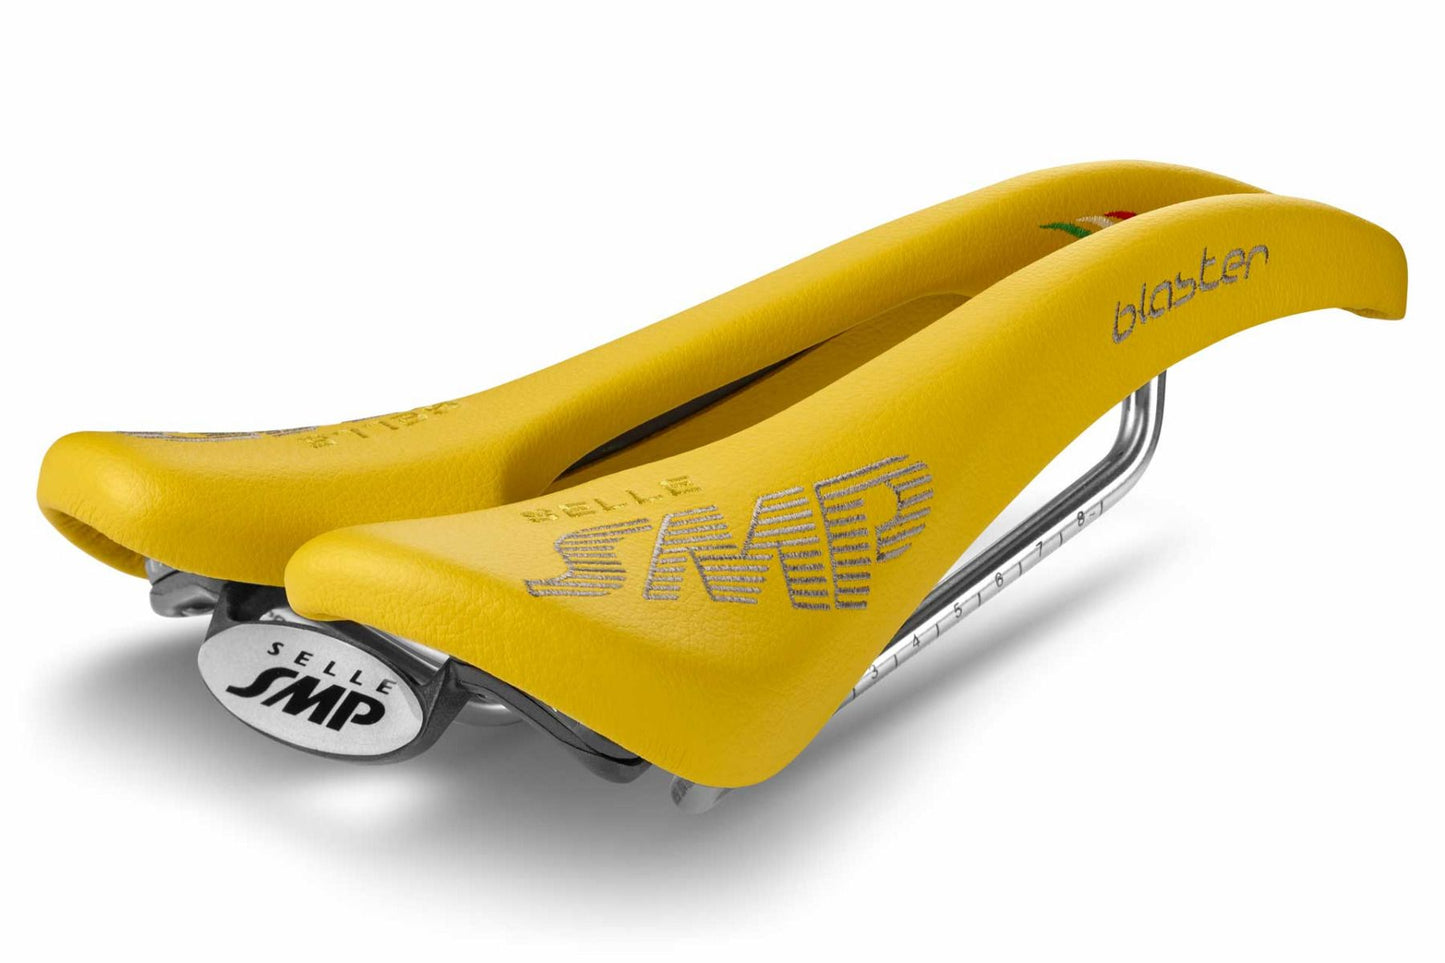 Selle SMP Blaster Saddle with Steel Rails (Yellow)